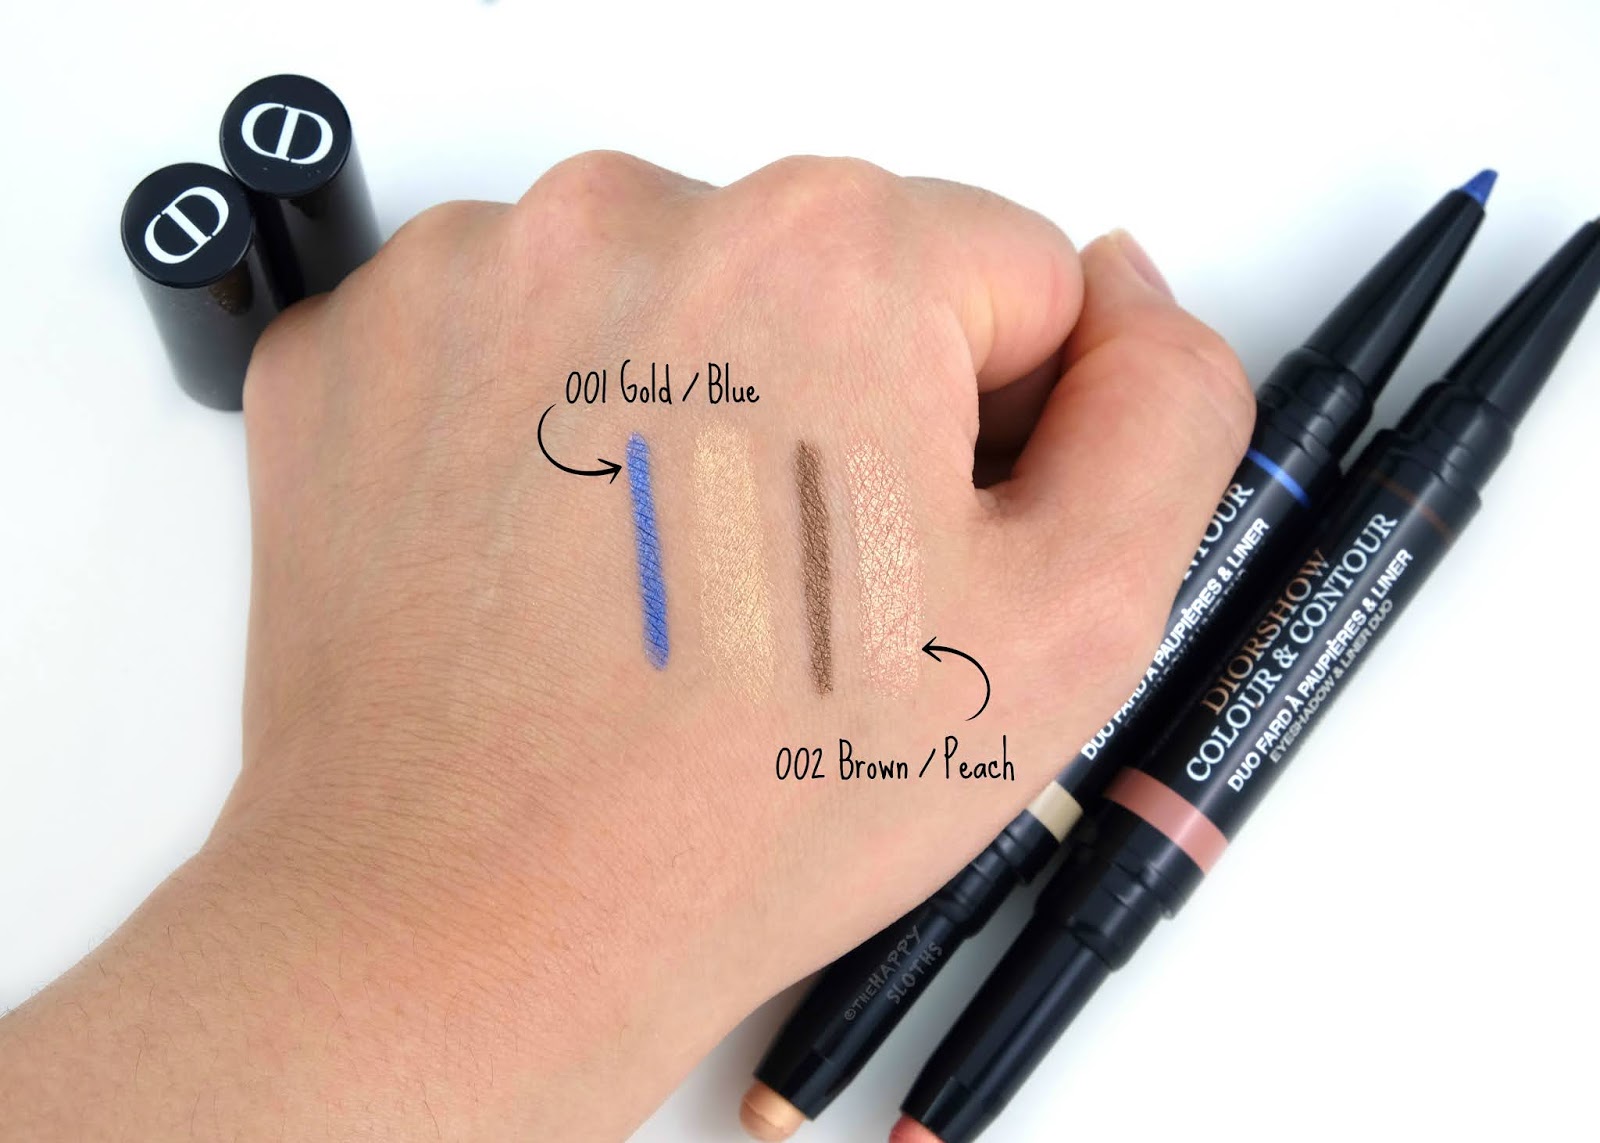 Dior Summer 2020 | Diorshow Colour & Contour Eyeshadow & Liner Duo: Review and Swatches